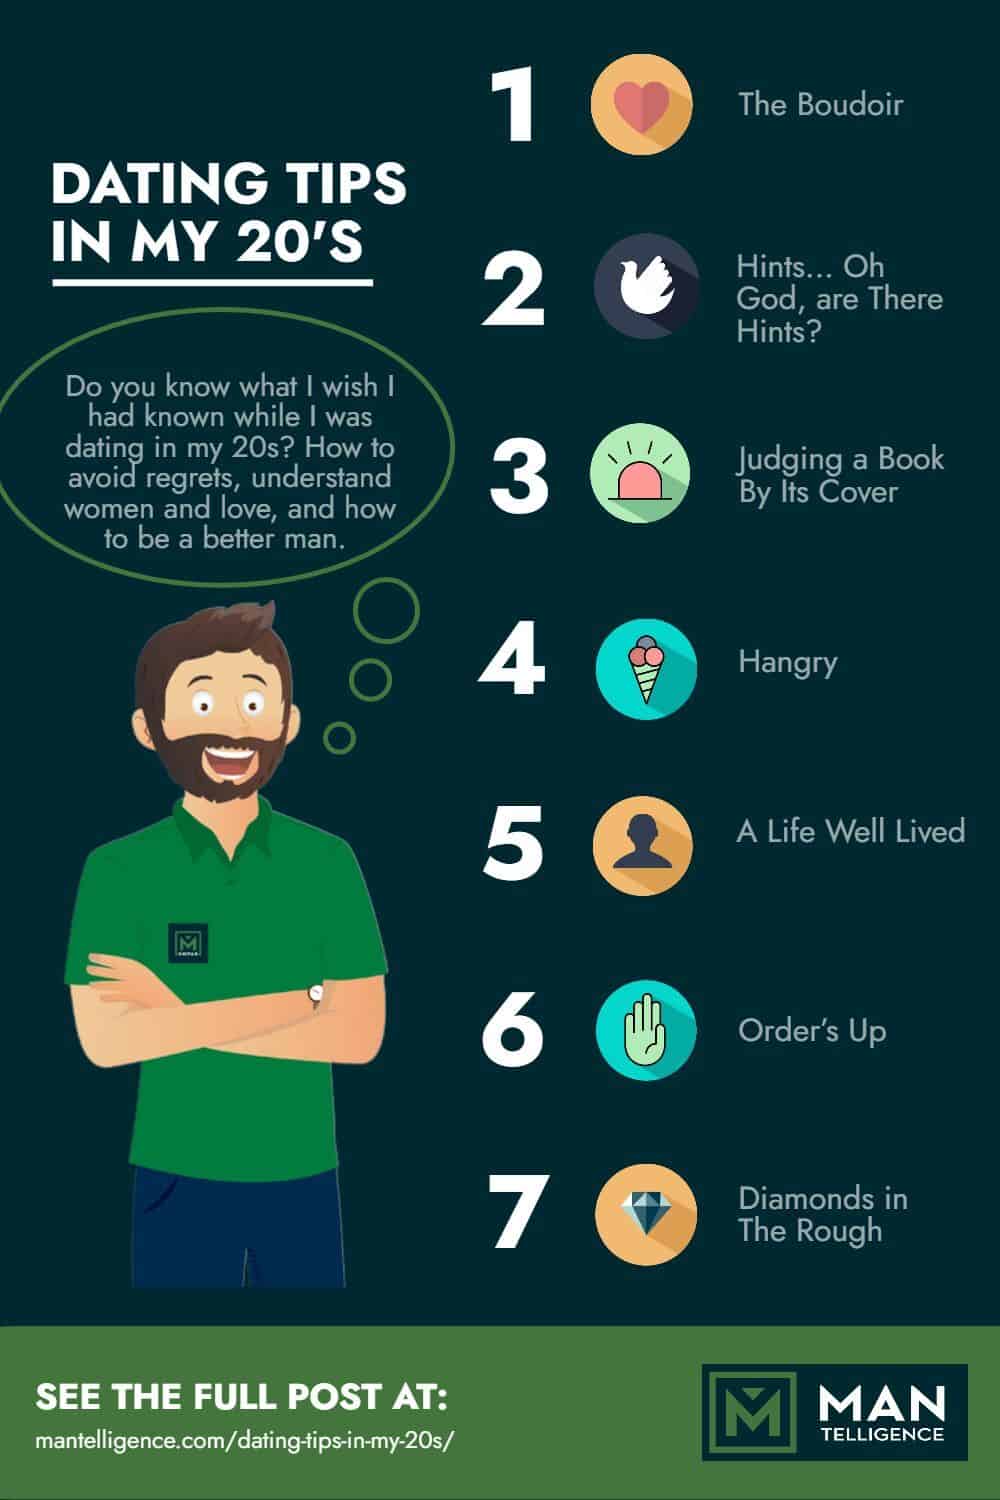 Dating Tips In My 20's - Infographic